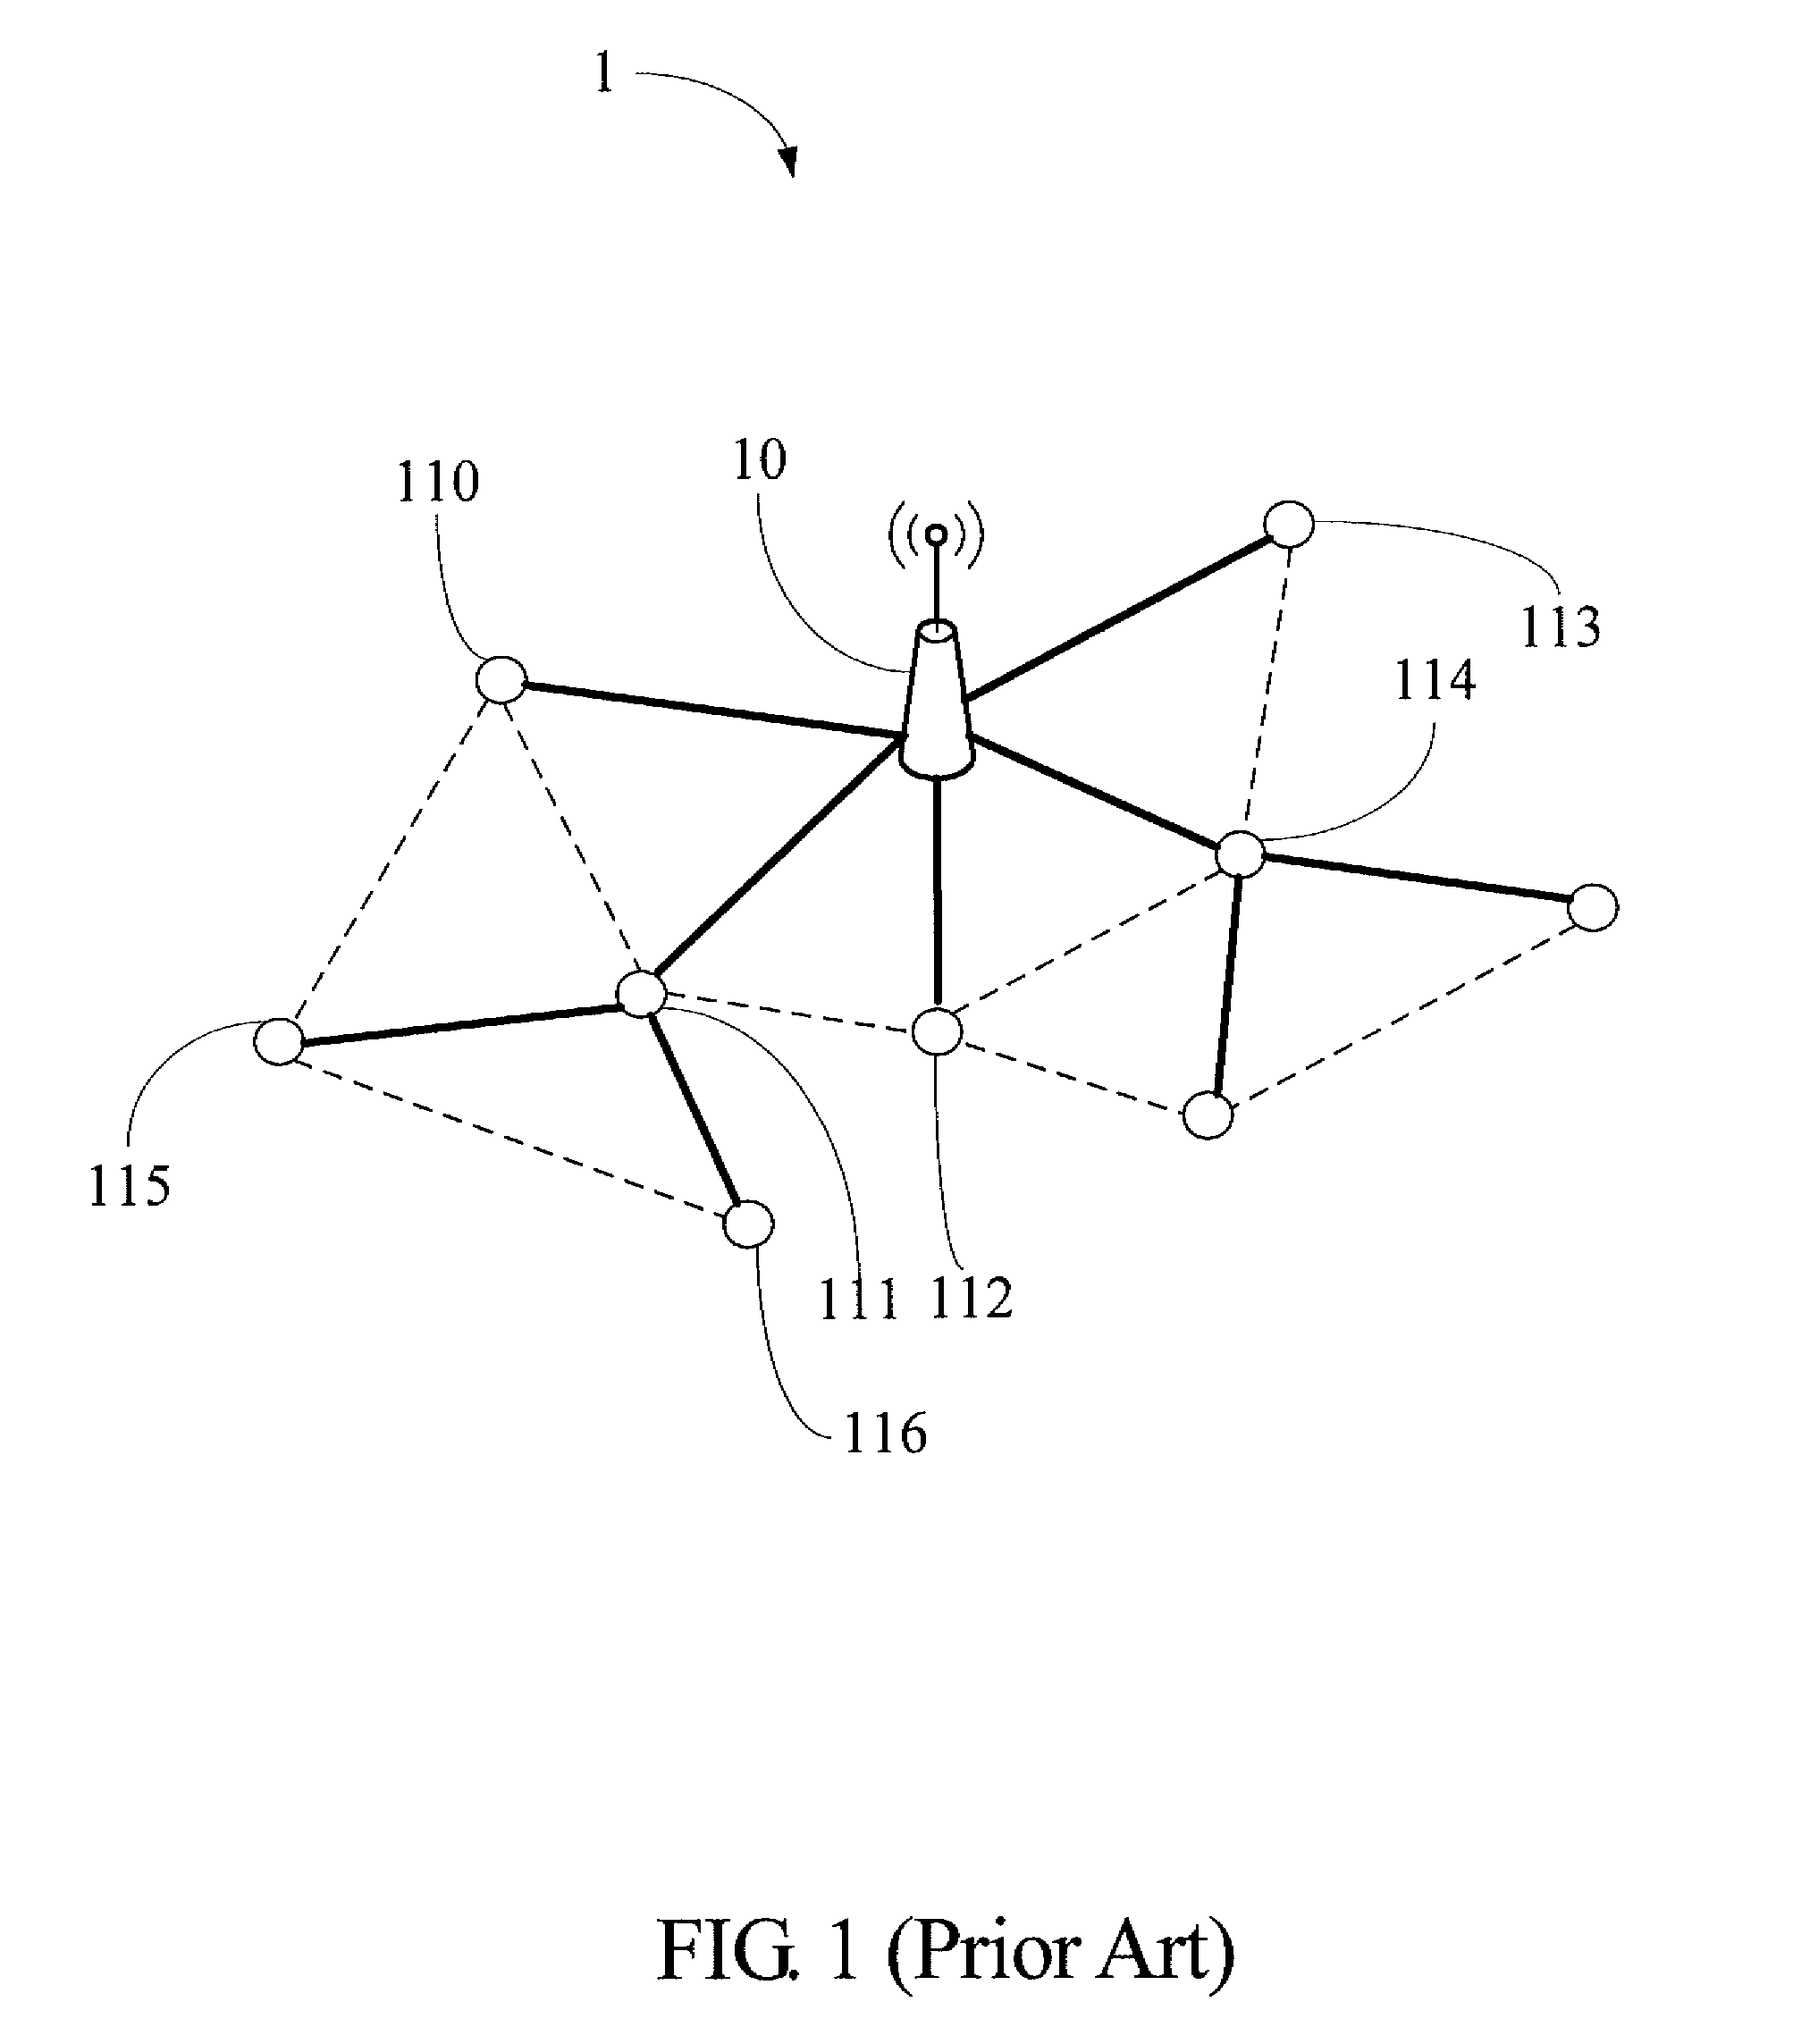 Apparatus for a beacon-enabled wireless network, transmission time determination method, and tangible machine-readable medium thereof